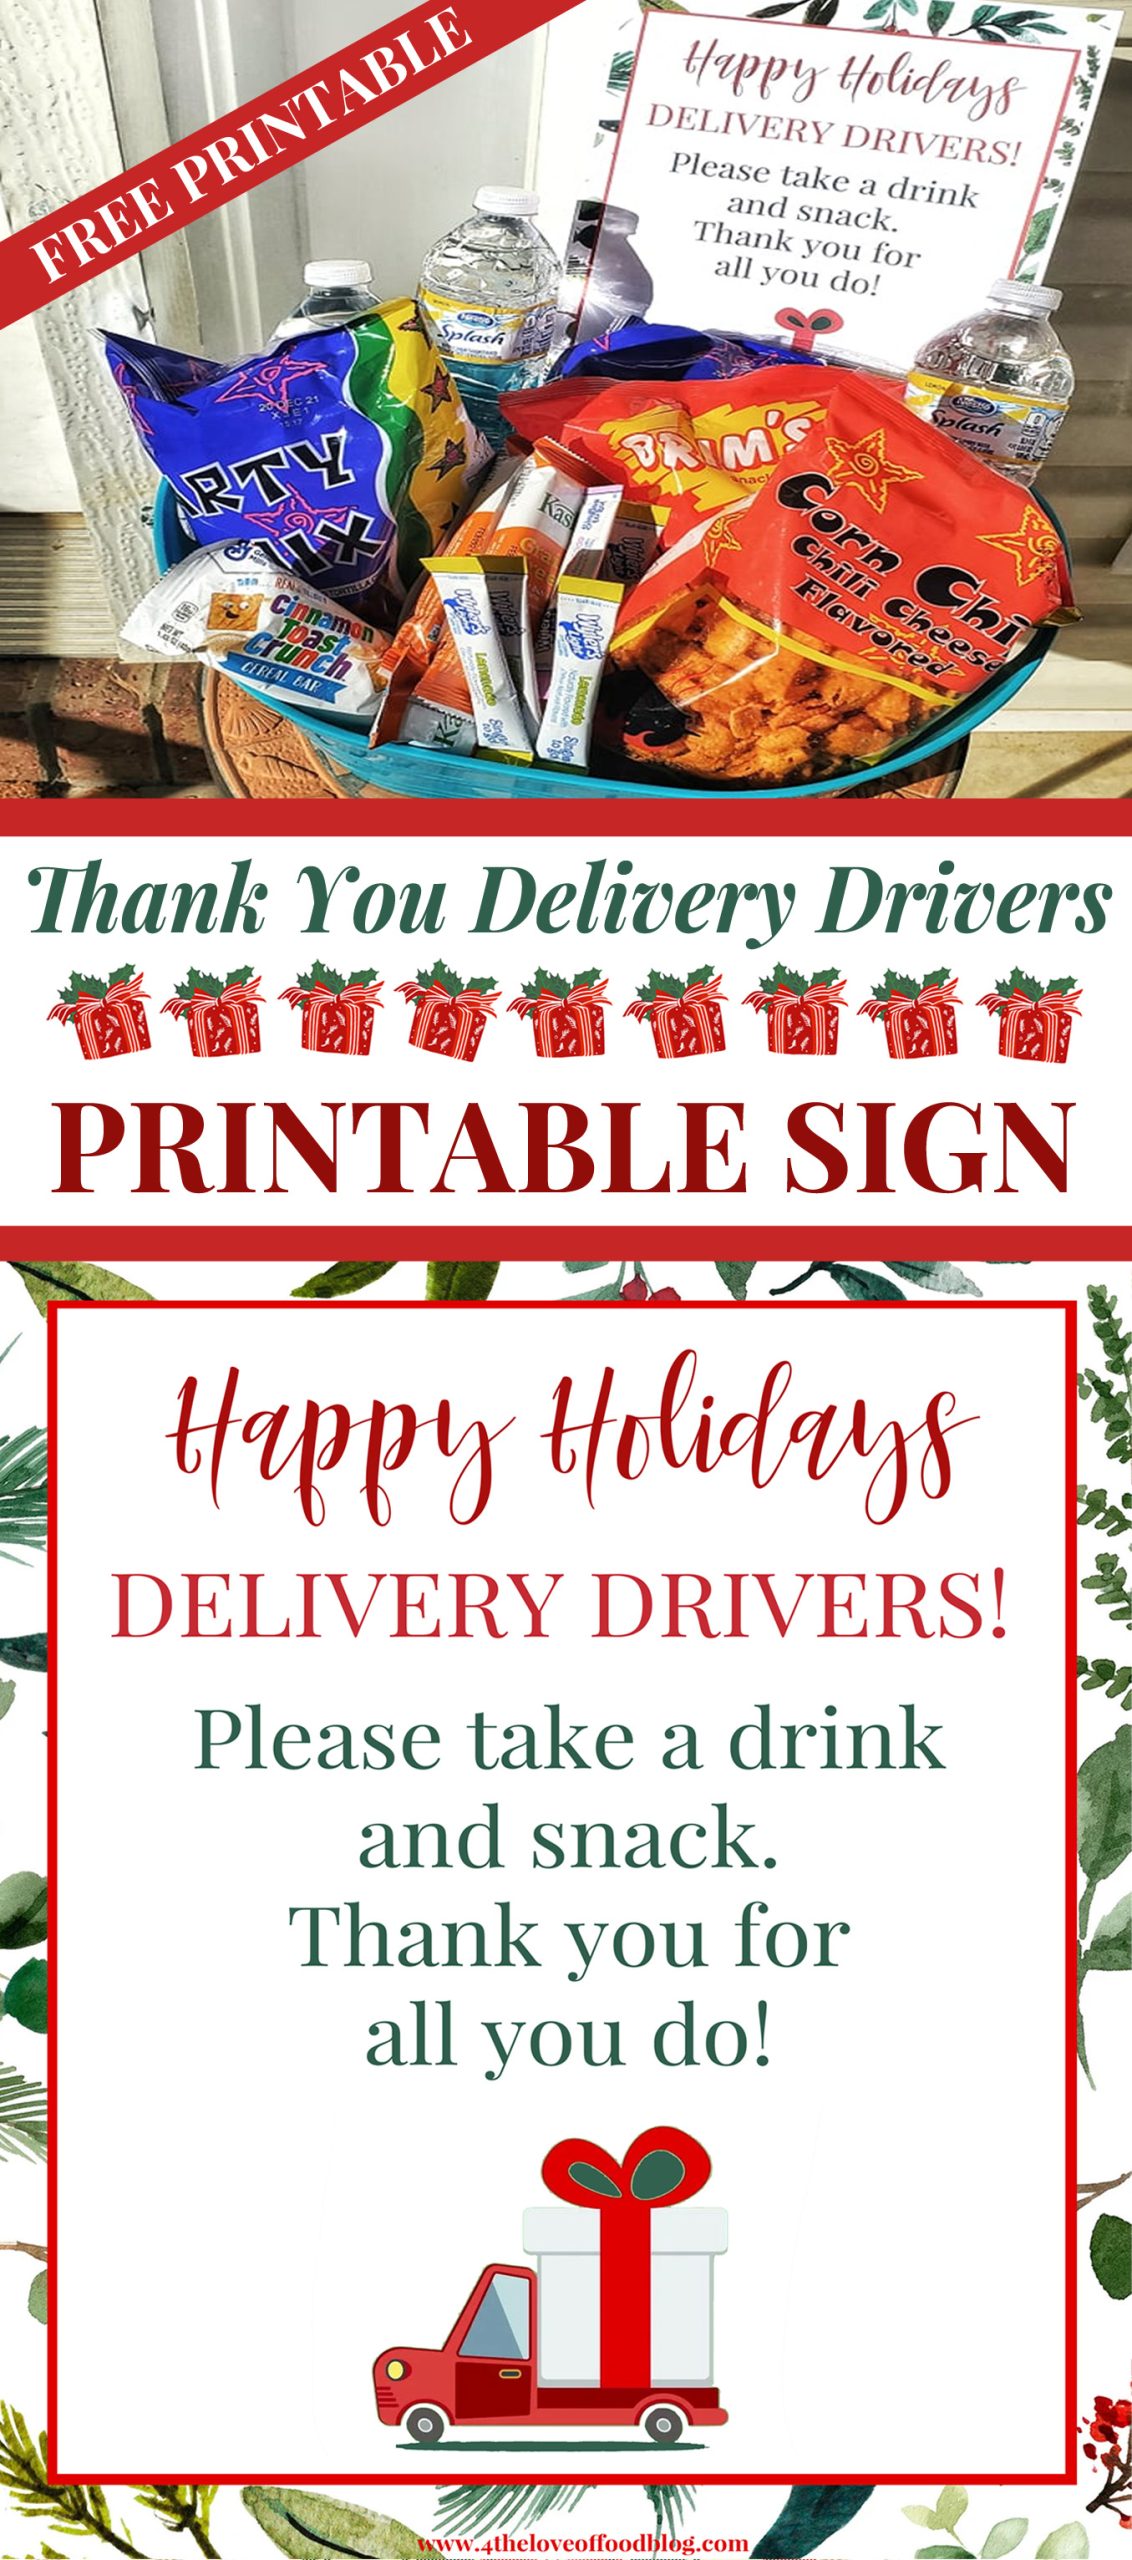 Thank You Delivery Drivers Snack Basket And Printable Sign For The Love Of Food